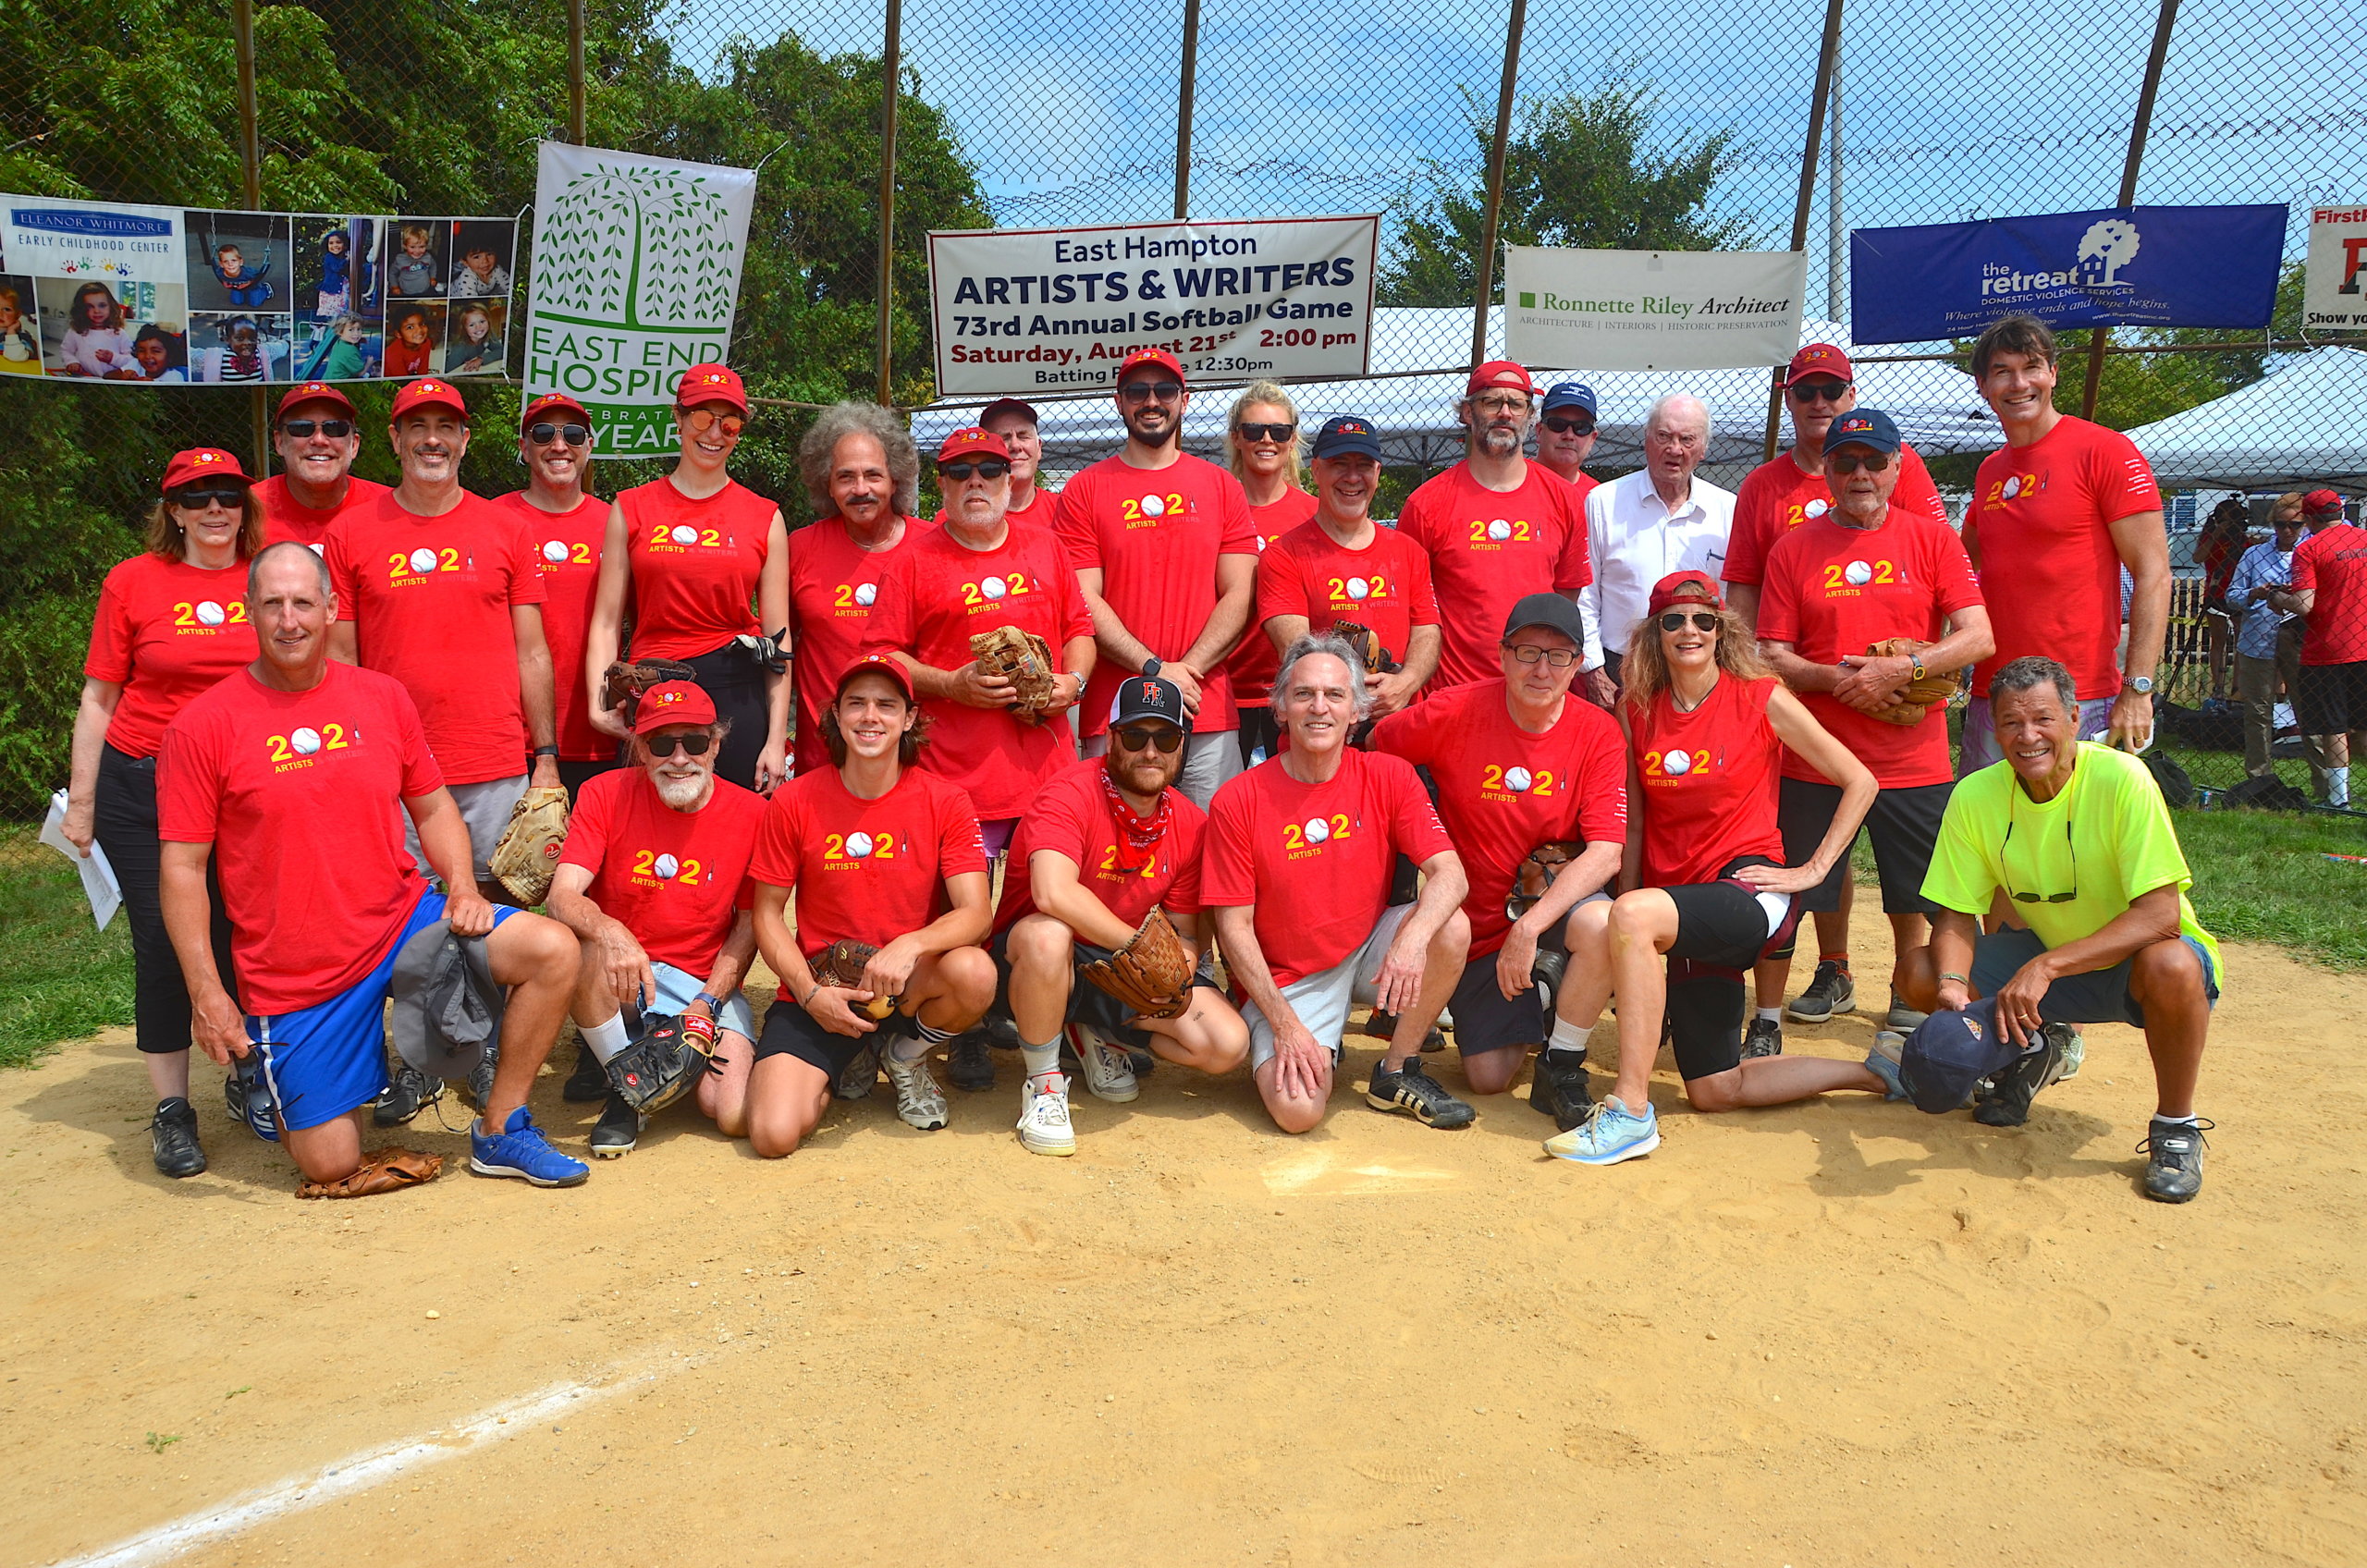 The 2021 Artists team at Artists and Writers Charity Softball Game